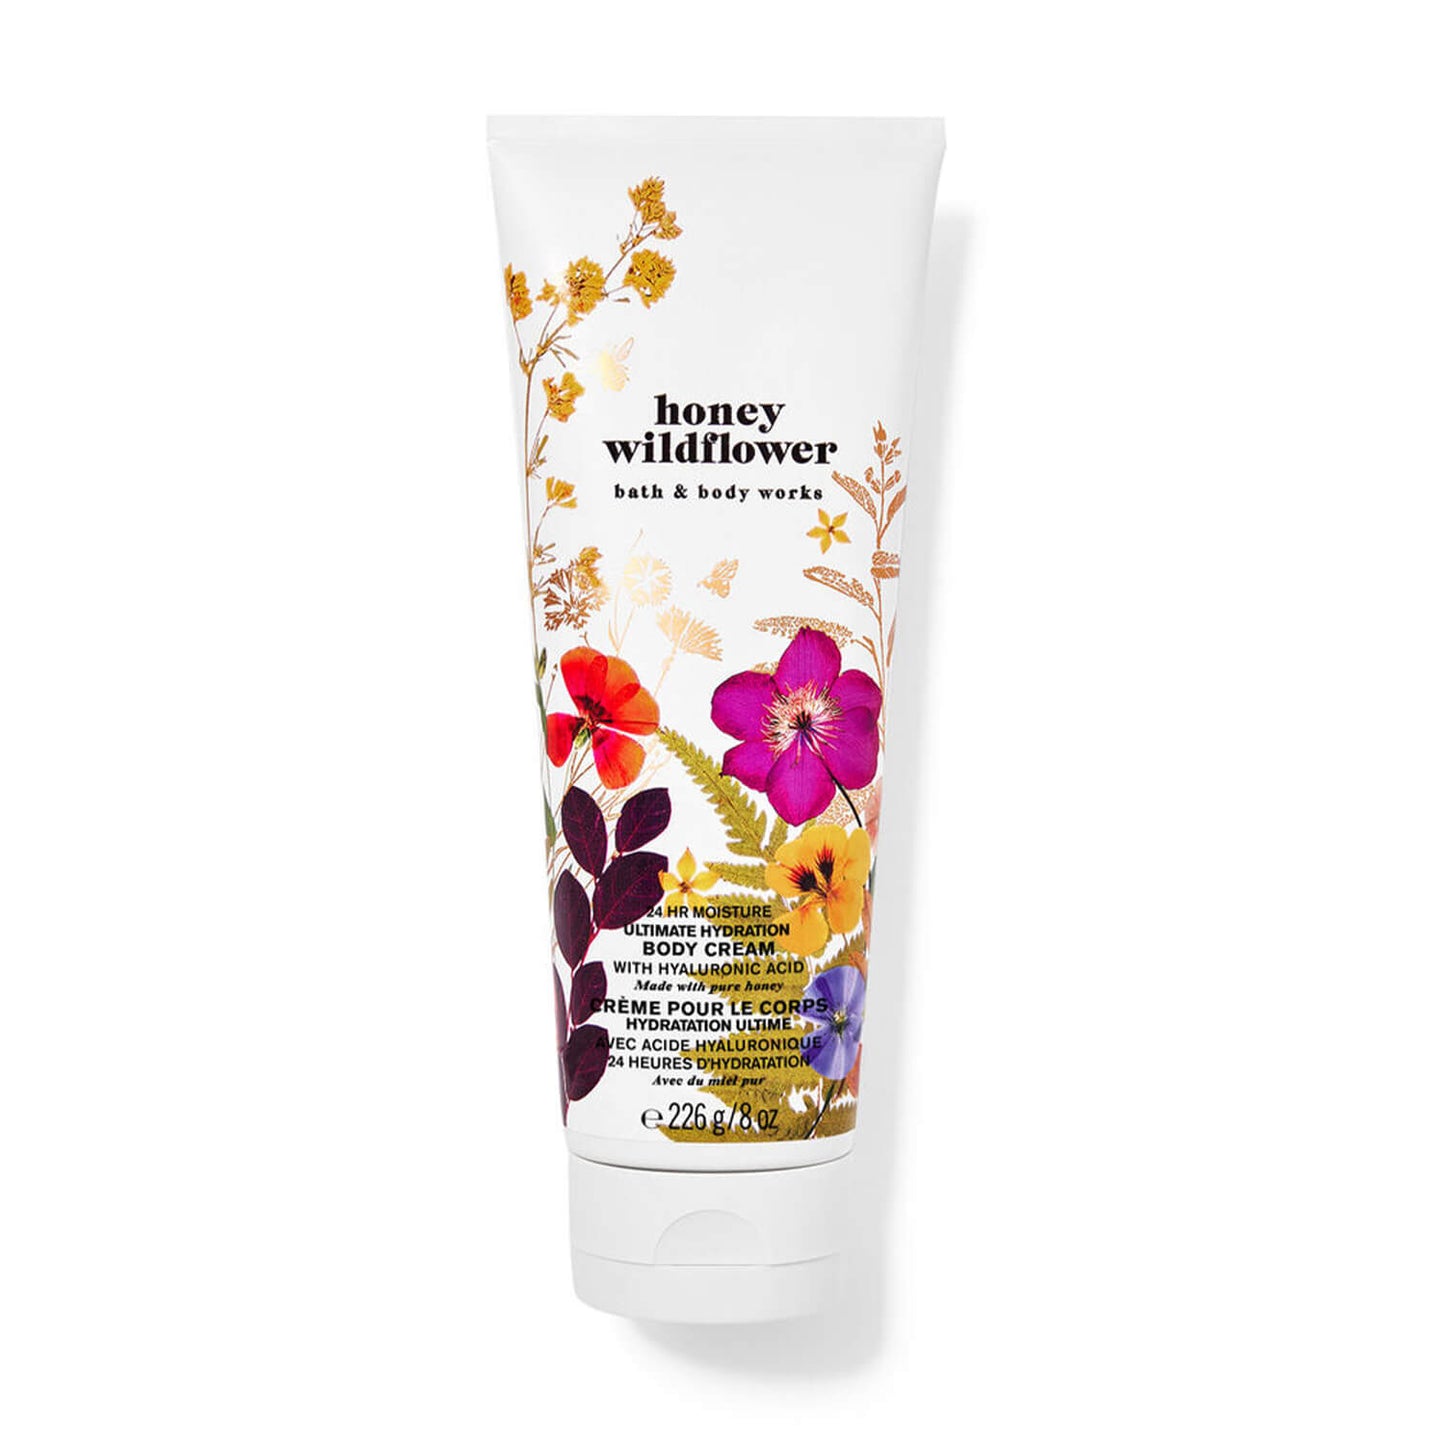 buy Bath & Body Works Body Cream in Honey Wildflower fragrance available for delivery in Pakistan